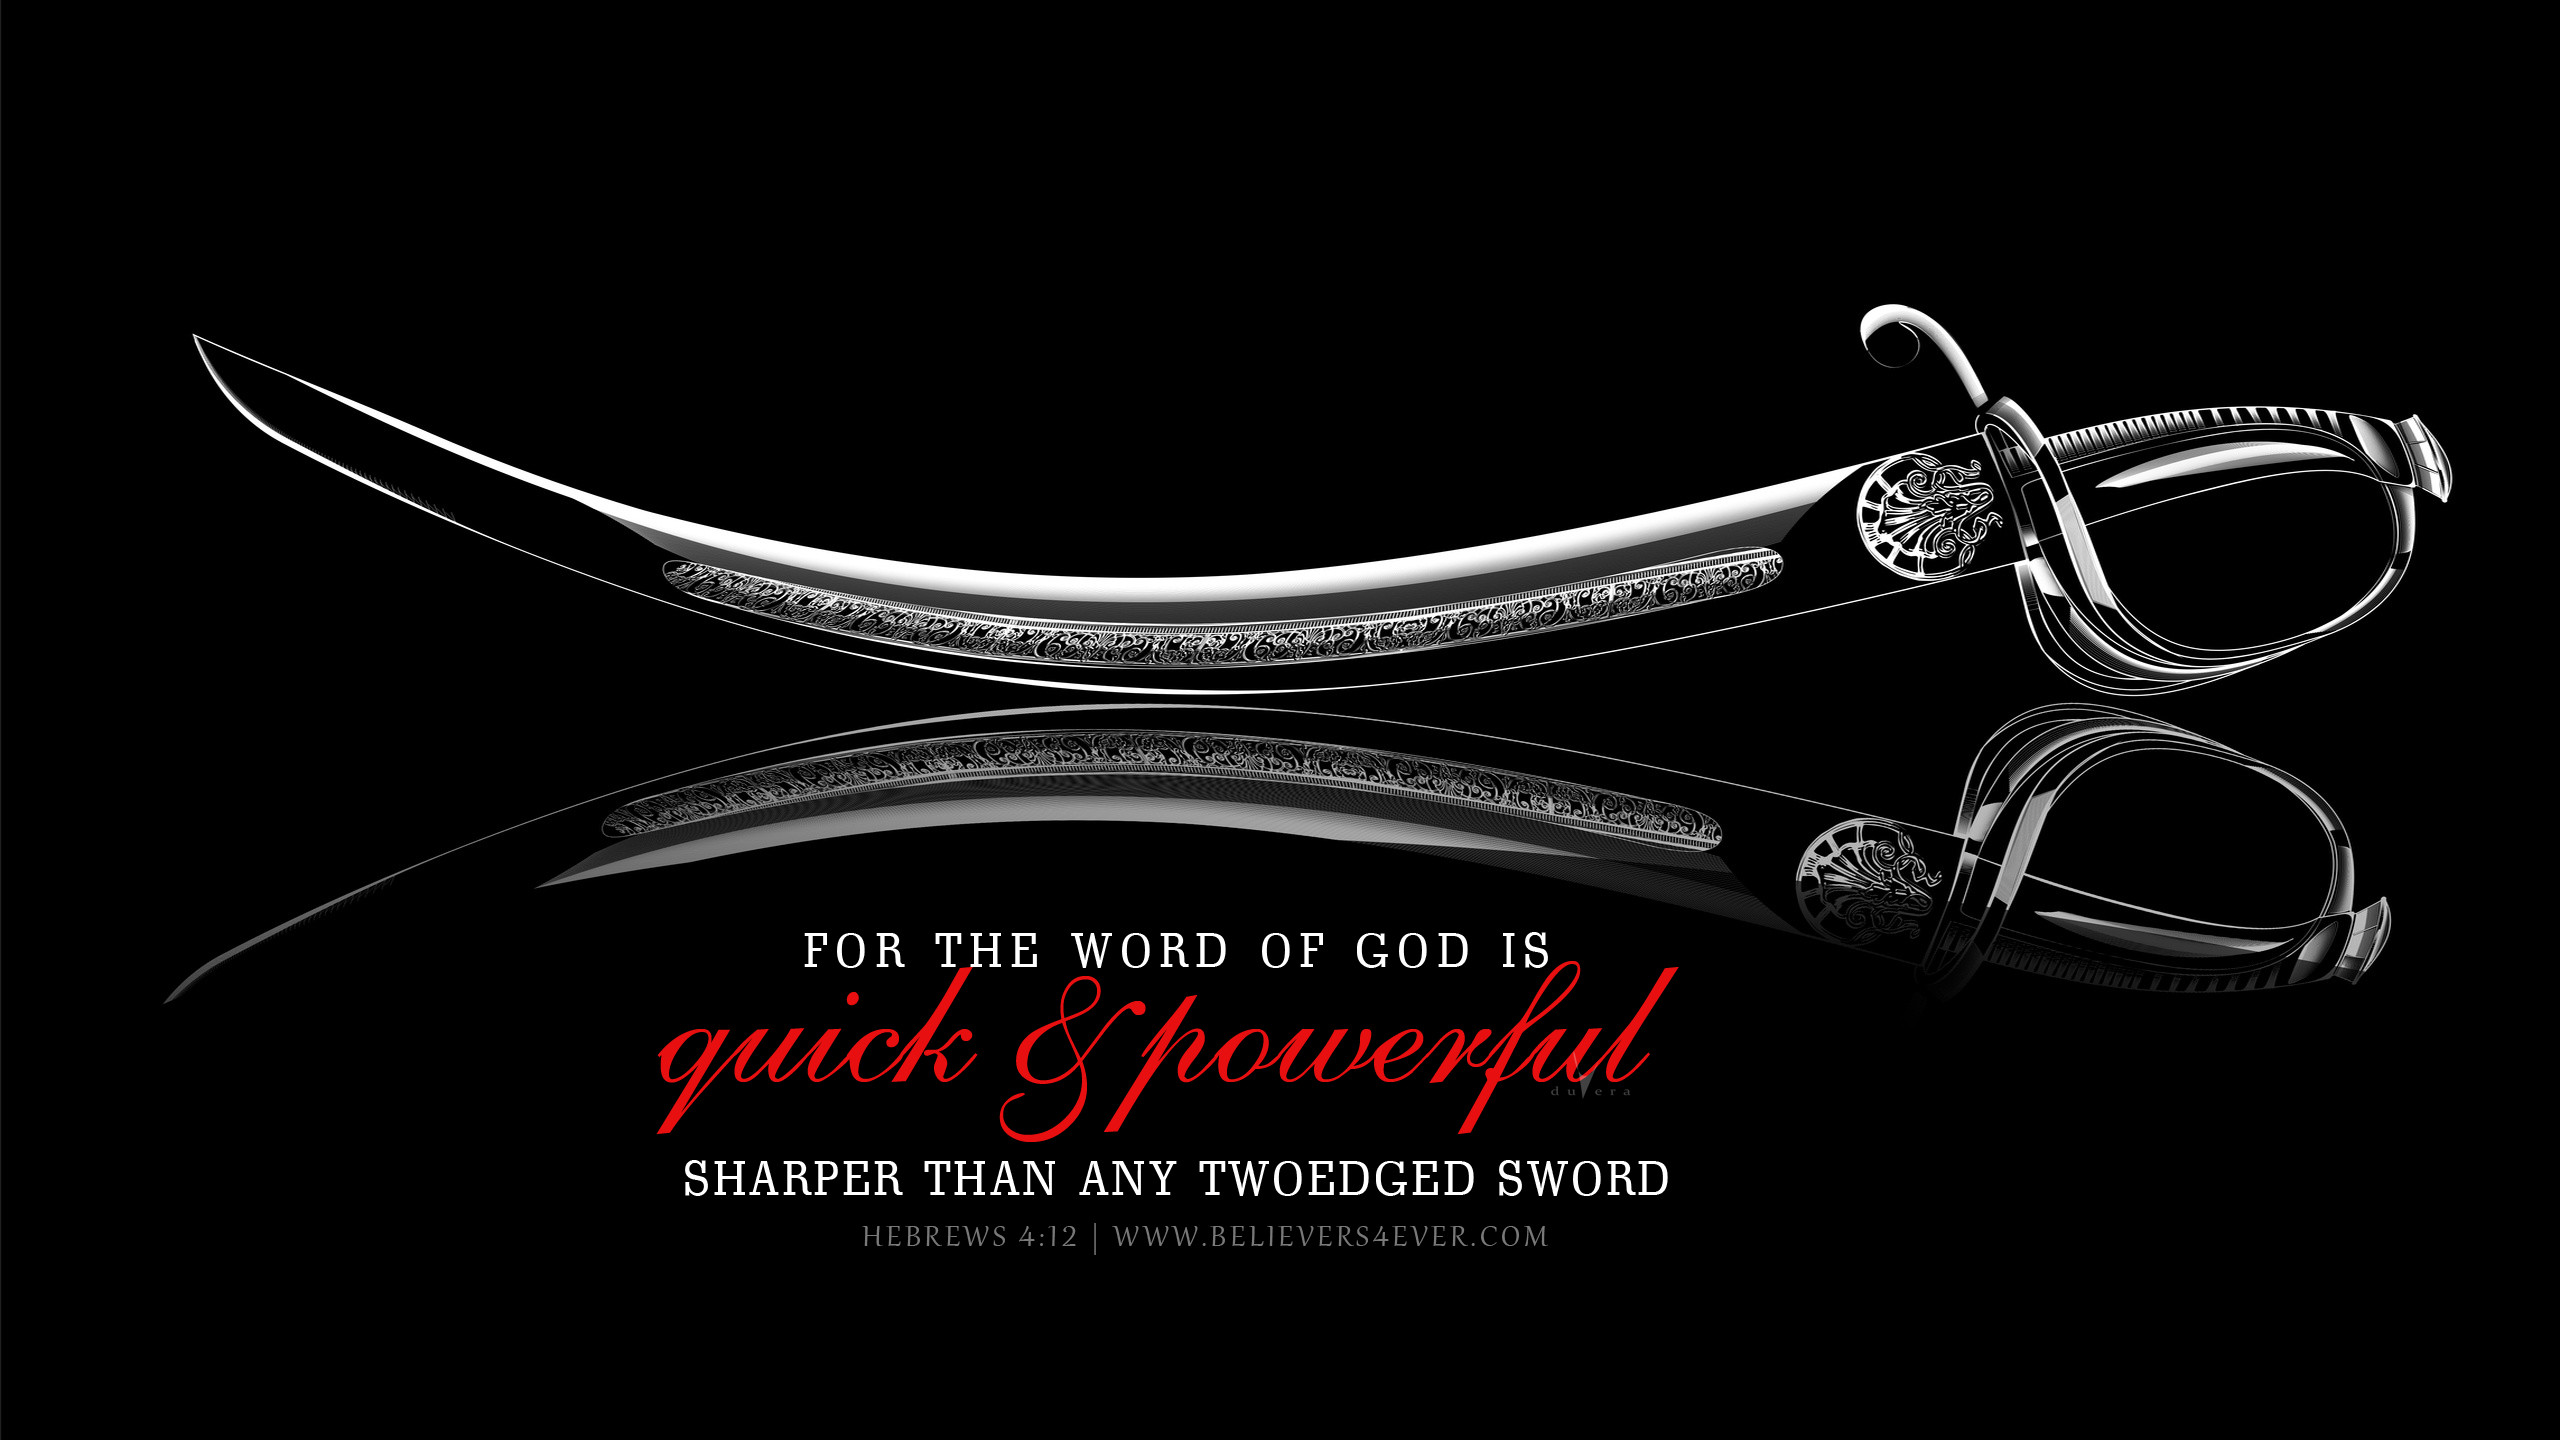 2560x1440 For the word of God is quick, and powerful, and sharper than any twoedged